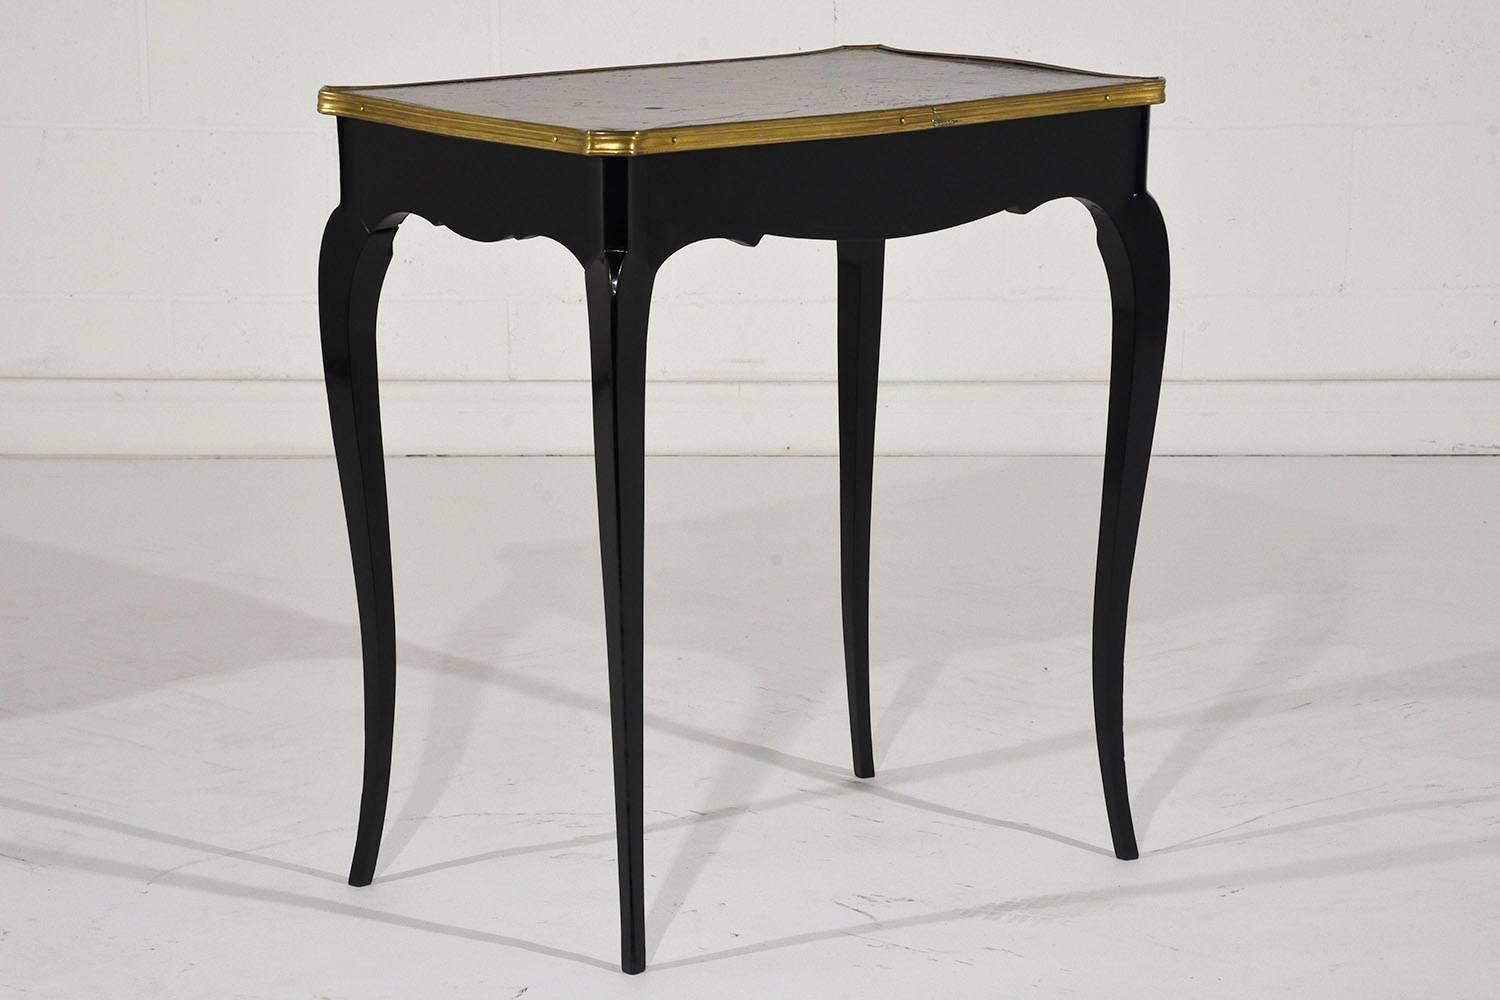 This pair of 1900s antique French, Louis XV style side tables are made from mahogany wood with an ebonized stain and a lacquered finish. The top features the original embossed cordova color leather top with a beautiful distressed finish. The edges